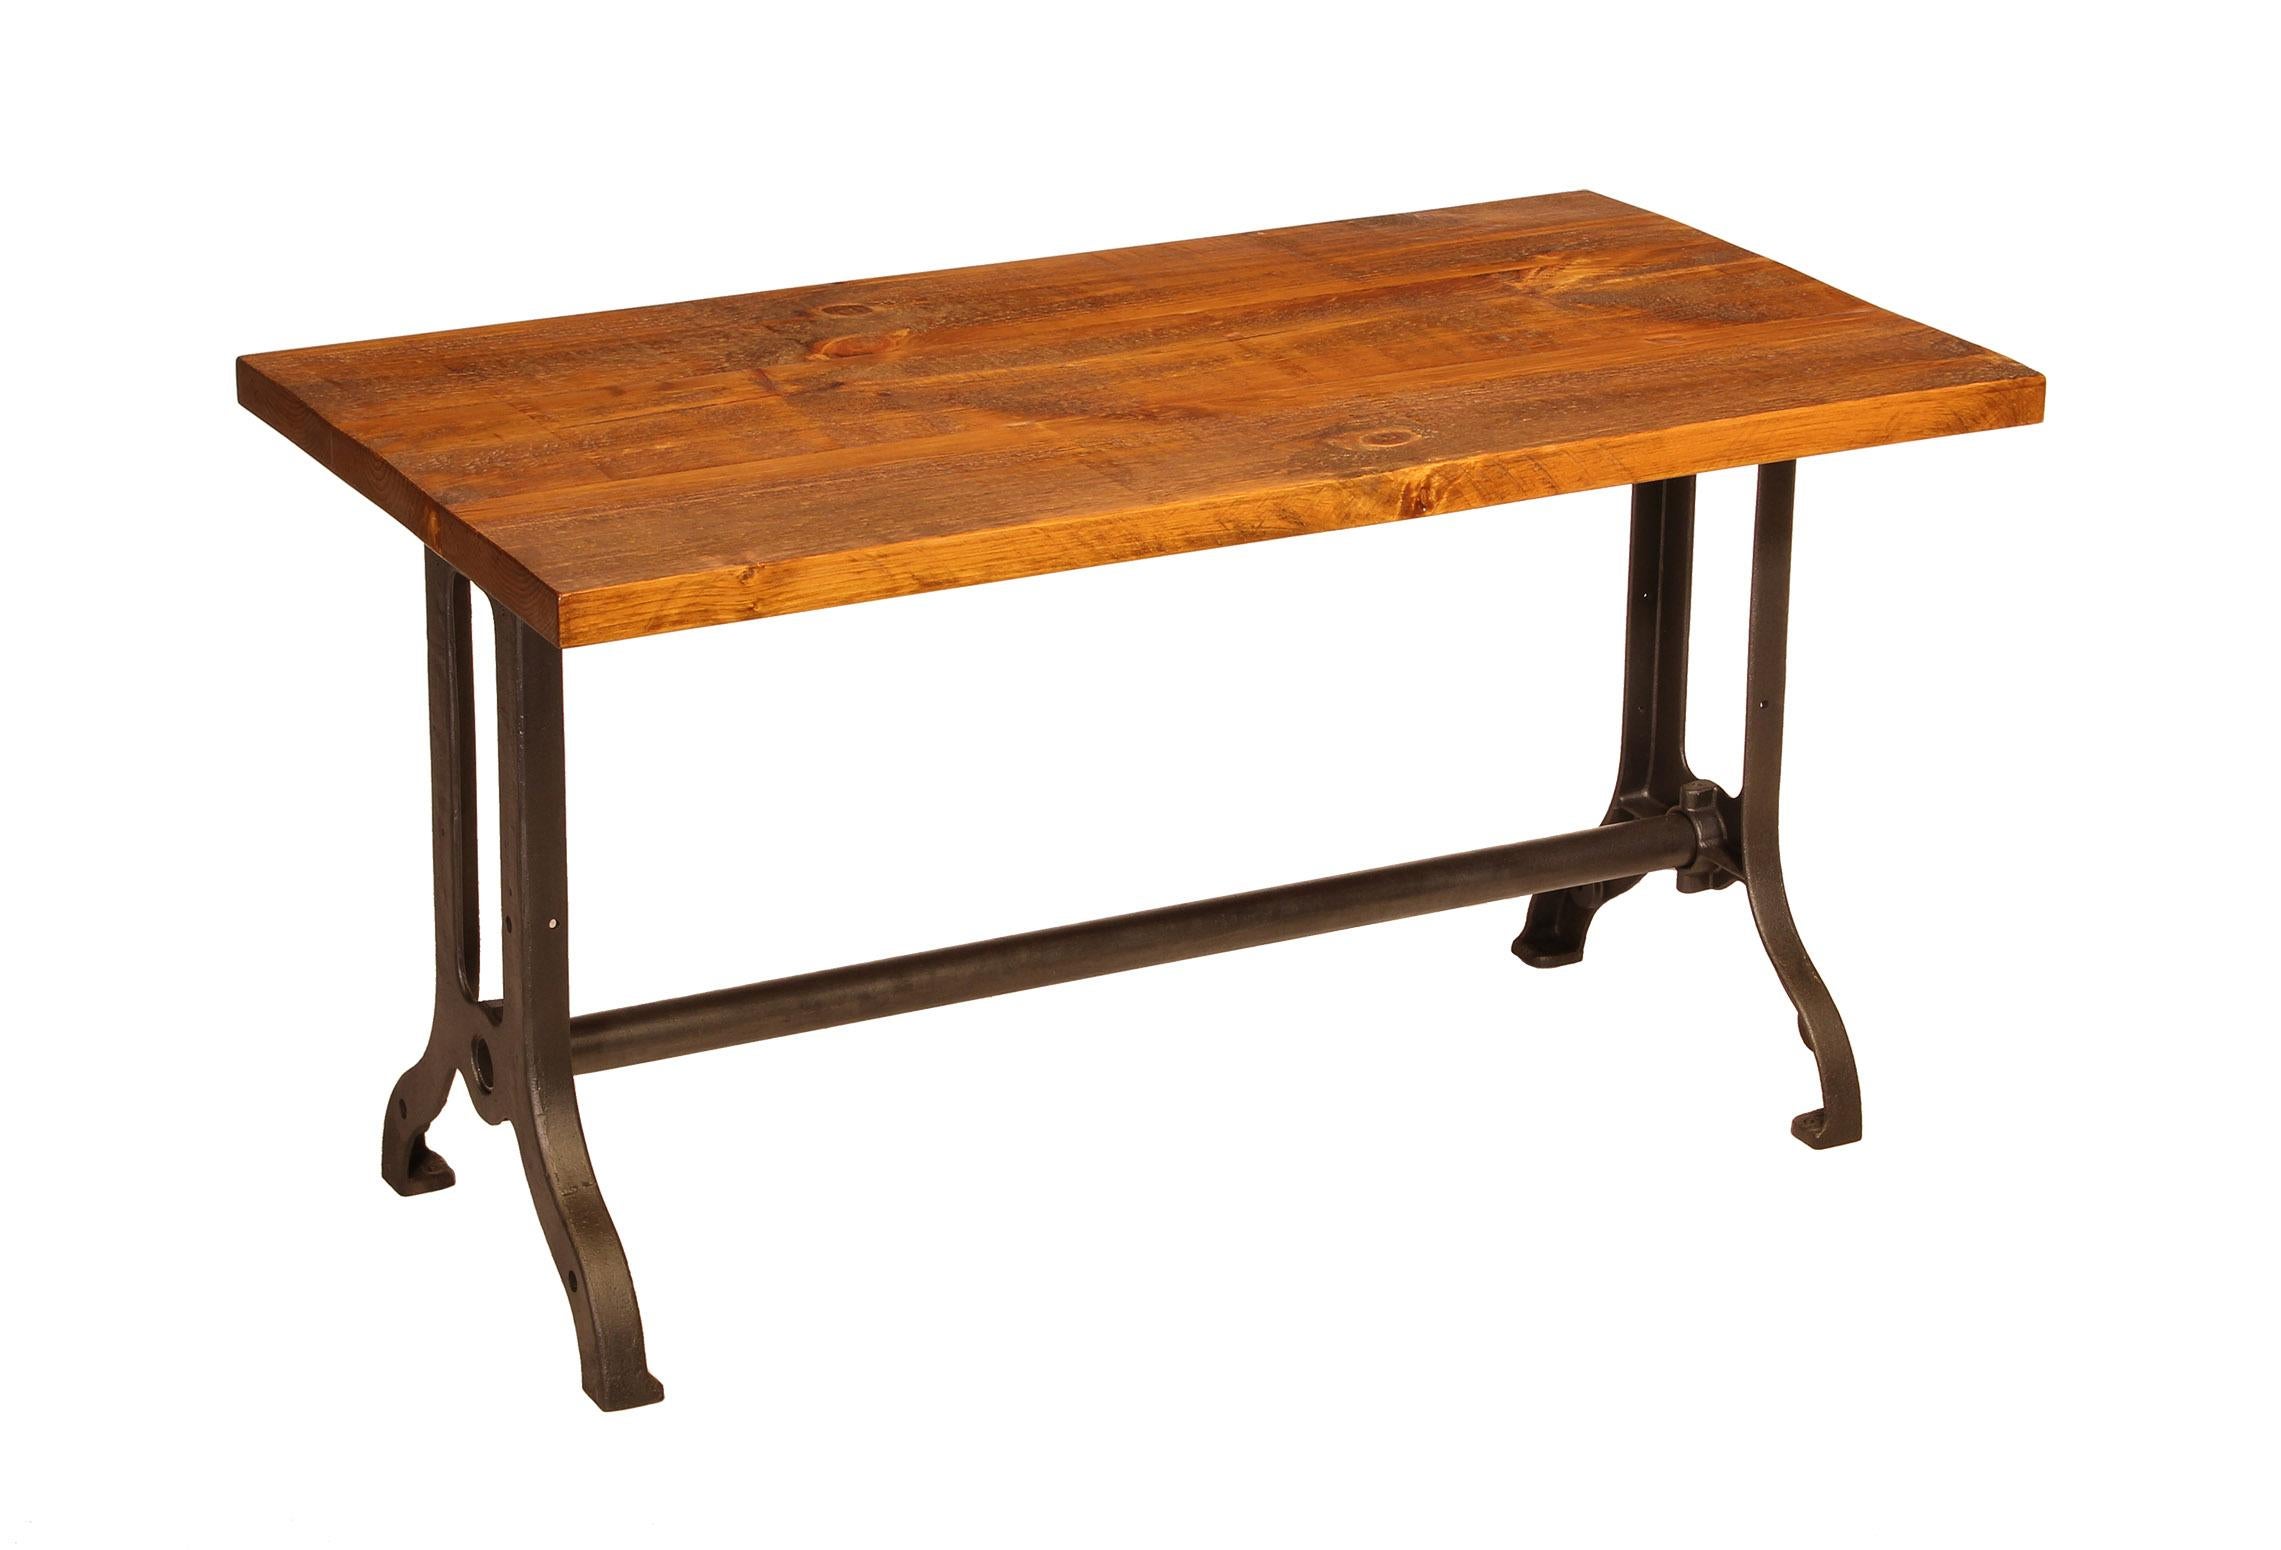 Authentic cast iron machine shop legs with a rough-sawn pine top make this one-of-a-kind industrial desk / table. Top is 1 3/4